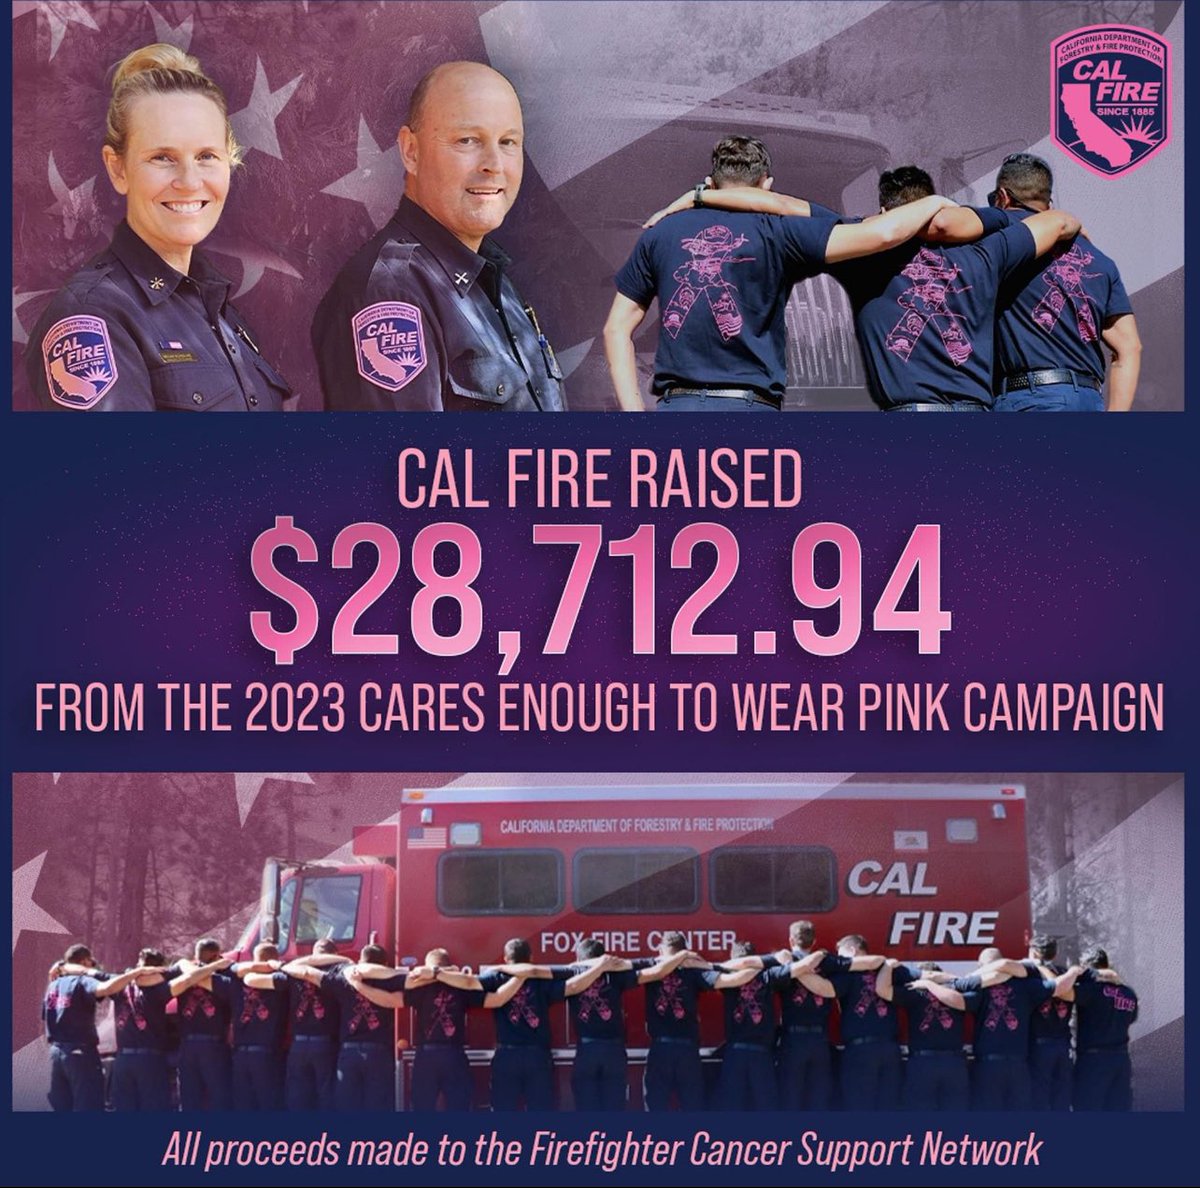 Proud of our team for their support of the #Firefighter Cancer Network! @CAL_FIRE